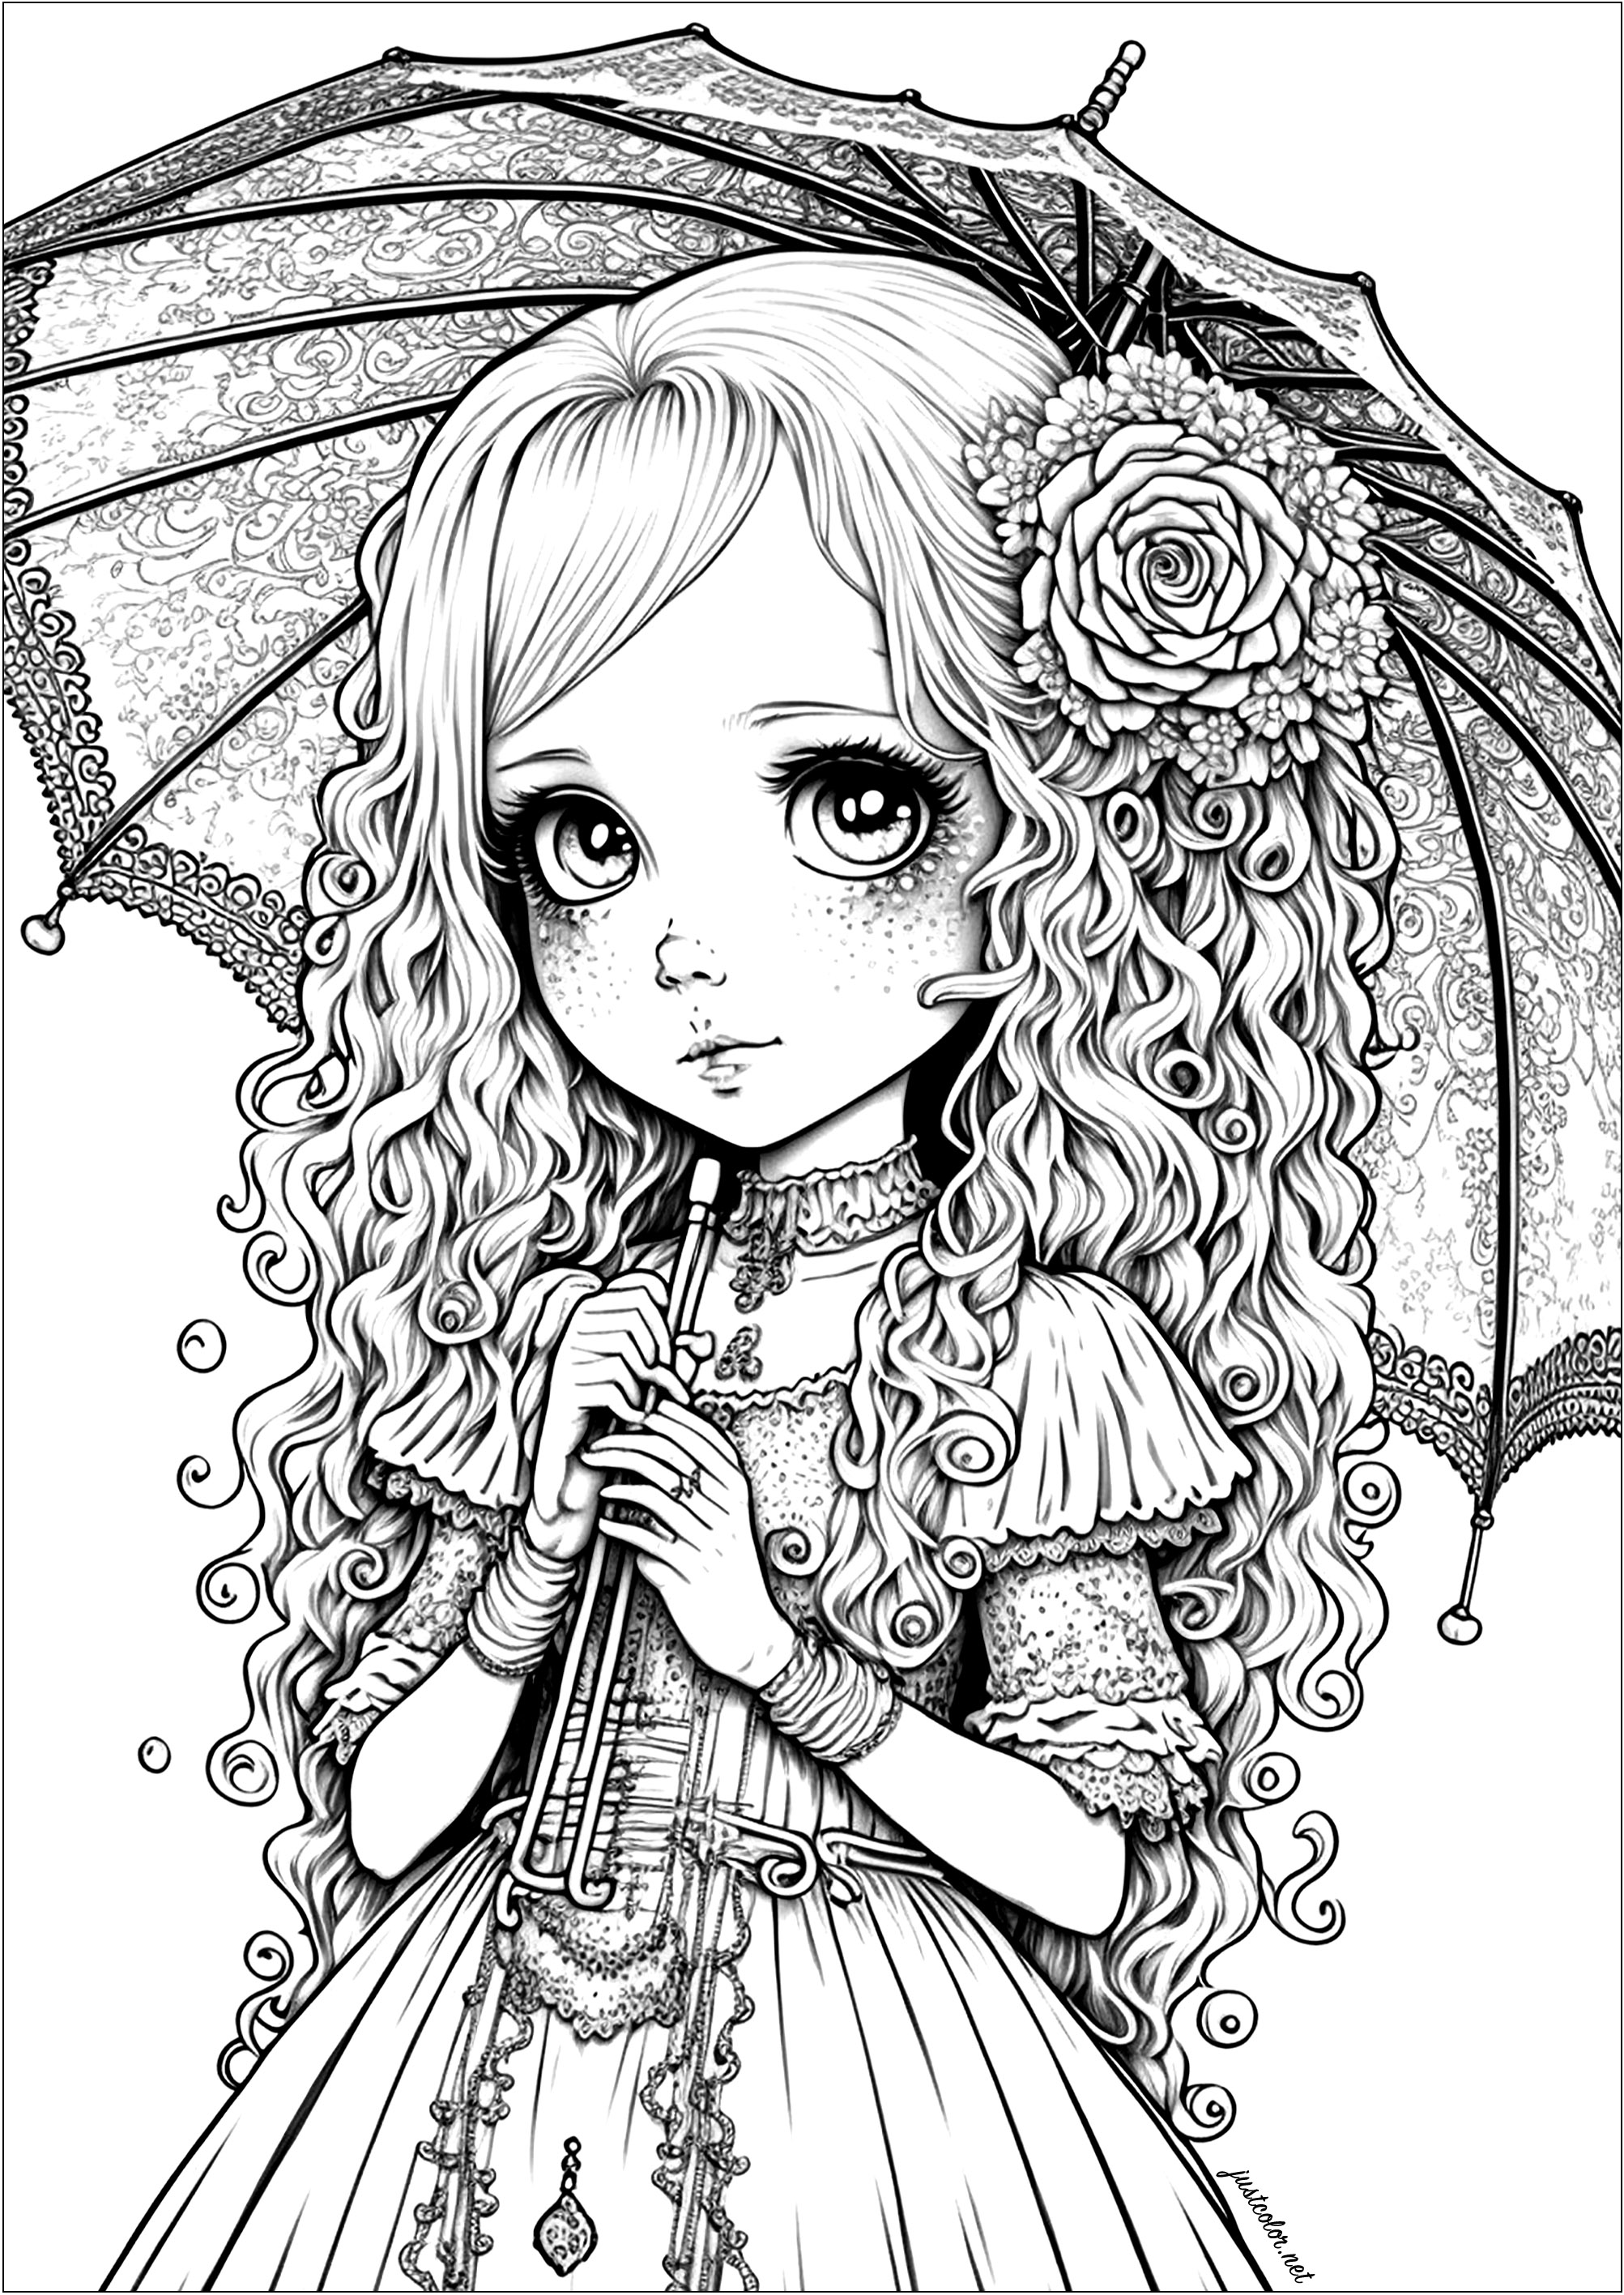 A nice coloring drawing of a young girl beautifully drawn, with the style Animated / Manga. This coloring page is a real treat for the eyes! A beautiful drawing of a young girl beautifully drawn, with the Anime / Manga style. You can let your imagination run wild and create a unique and personal coloring.